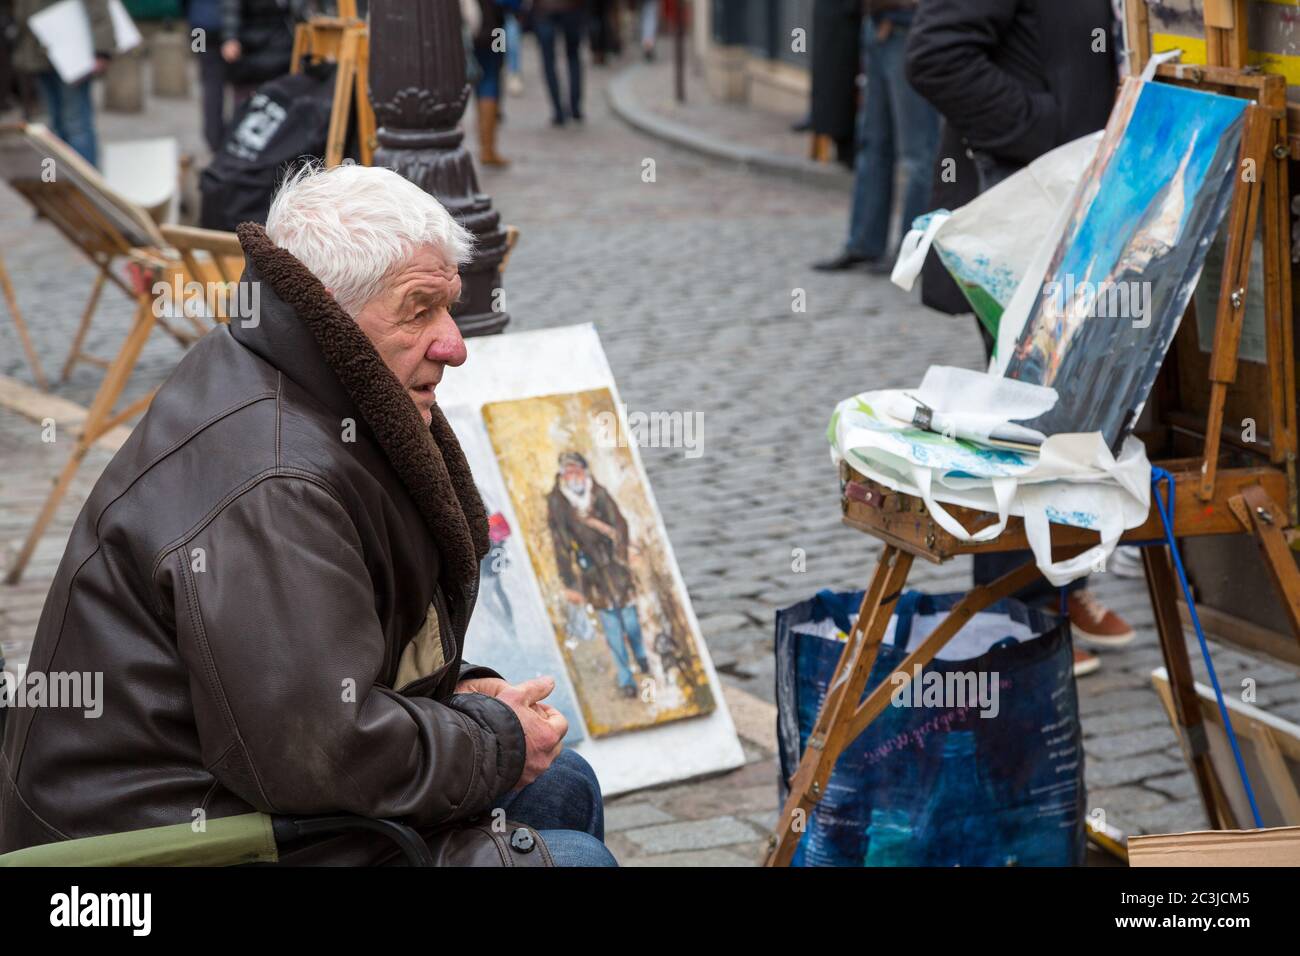 PARIS, FRANCE - MARCH 3RD: Street artists display their work in a cobbled market square in Montmartre, 18th Arrondissement. On March 3rd 2015 Stock Photo